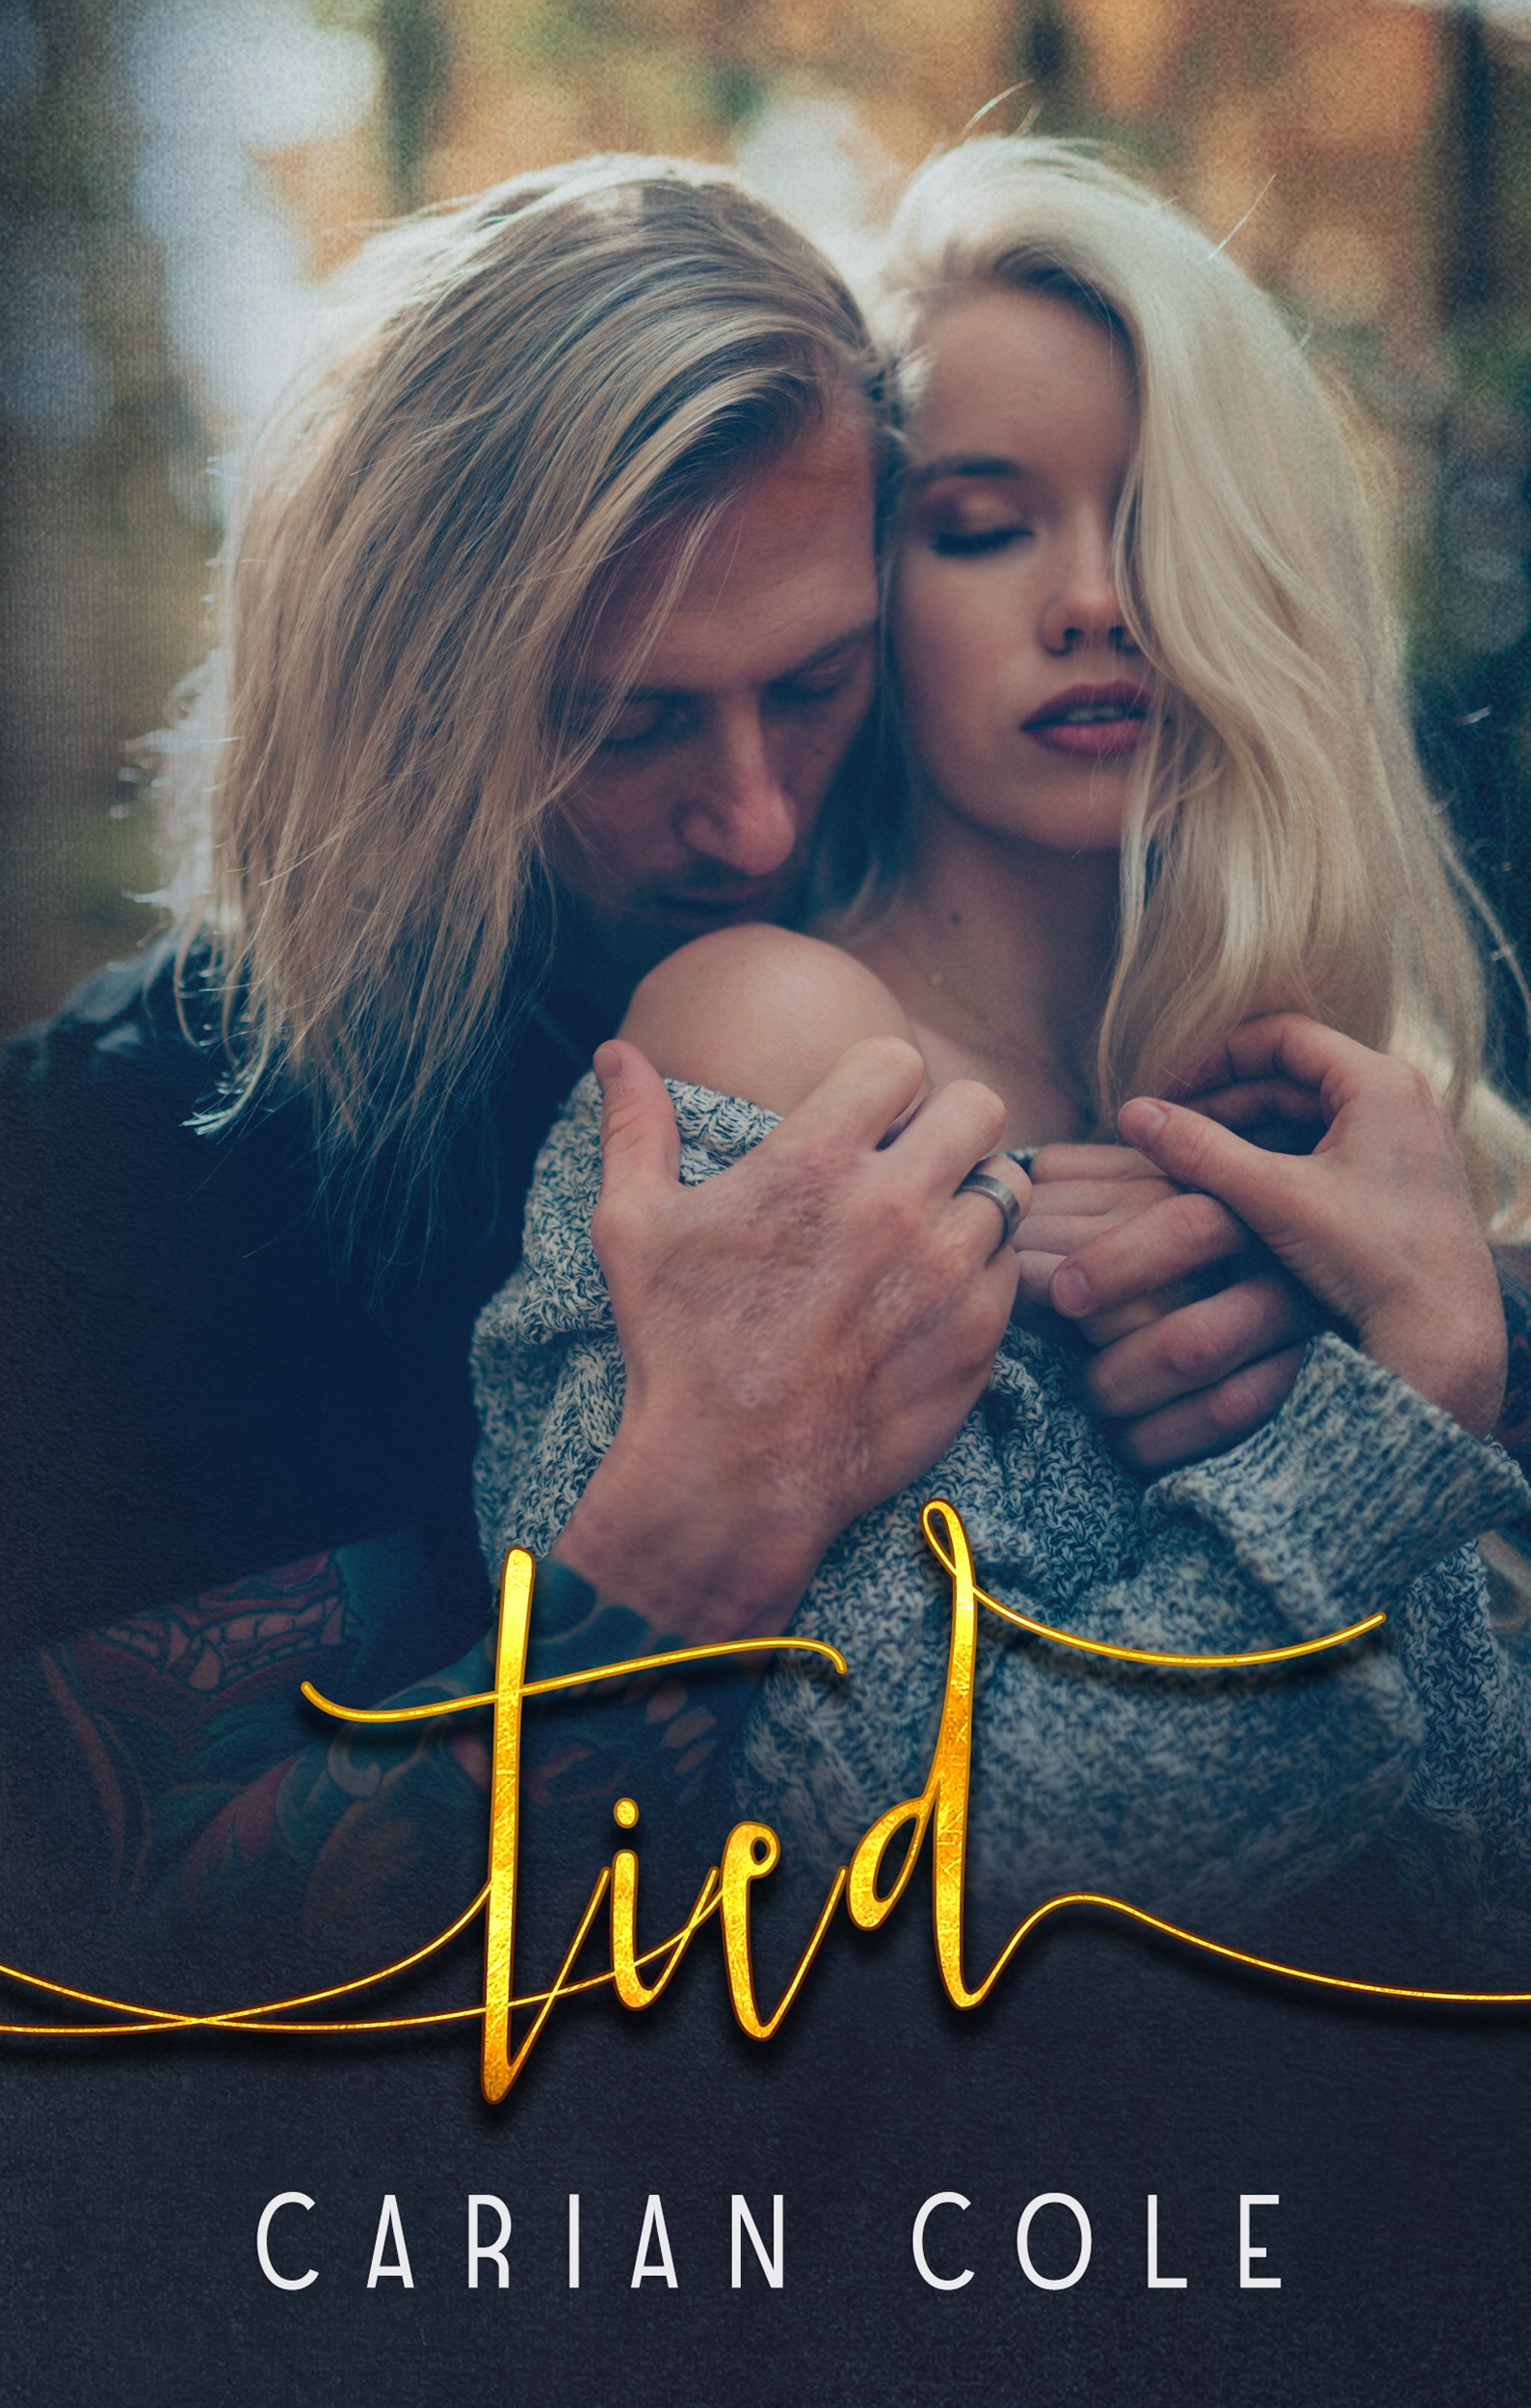 NewRelease Tied (Devils Wolves #2) by Carian Cole #Review #5Stars ...